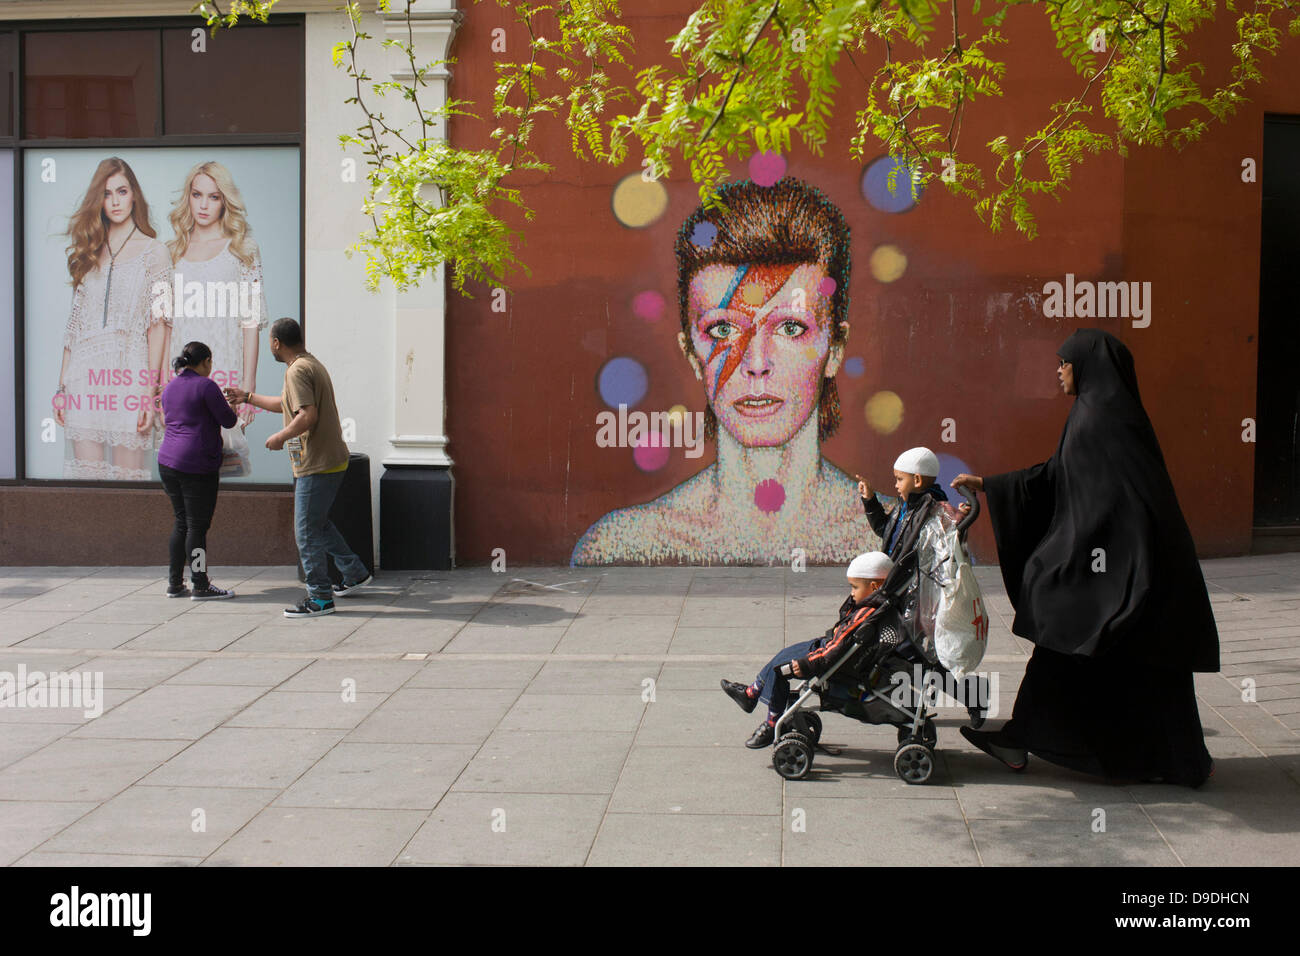 Brixton, London: 18th June 2013 - A mural of iconic musician and singer David Bowie has appeared on the wall of Morleys department store in Brixton, Lambeth, south London. The Bowie face is sourced (by artist James Cochran, aka Jimmy C) from the cover of his 1973 album Aladdin Sane at the height of his 1970s fame. The pop icon lived at 40 Stansfield Road, Brixton, from his birth in 1947 until 1953. This cover appeared in Rolling Stone’s list of the 500 greatest albums of all time, making #277. Credit: Richard Baker / Alamy Live News Stock Photo